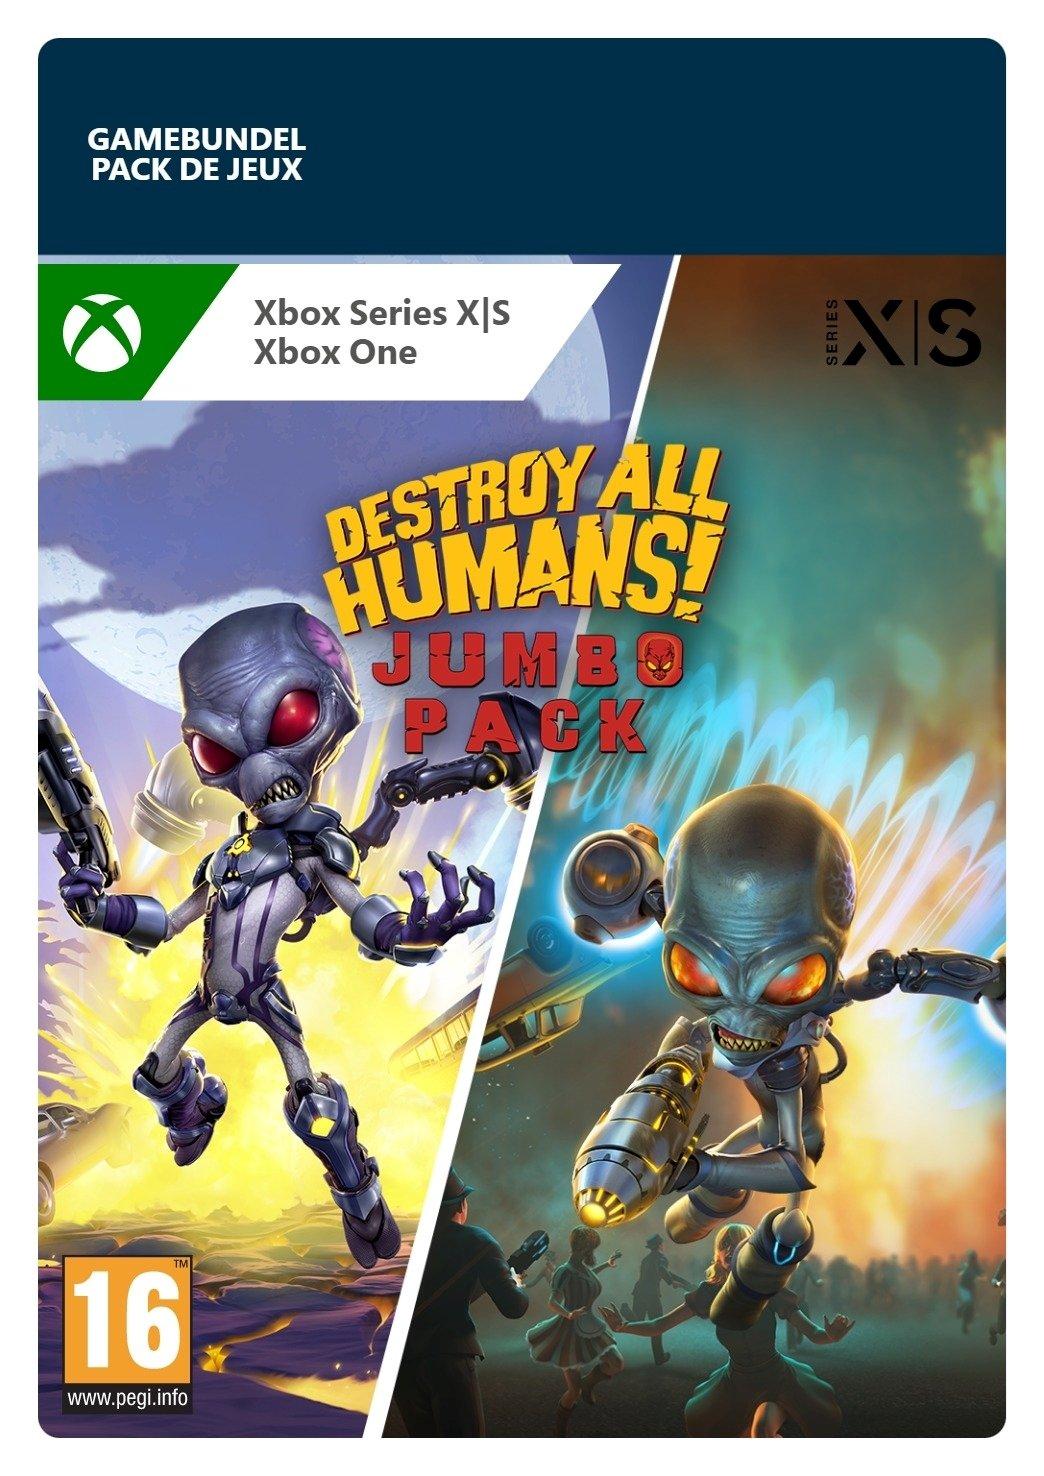 Destroy All Humans! 2 Reprobed: Jumbo Pack - Xbox Series X/Xbox One - Bundle | G3Q-01412 (313e07d9-c15b-b449-8522-bfdb4d5df73f)